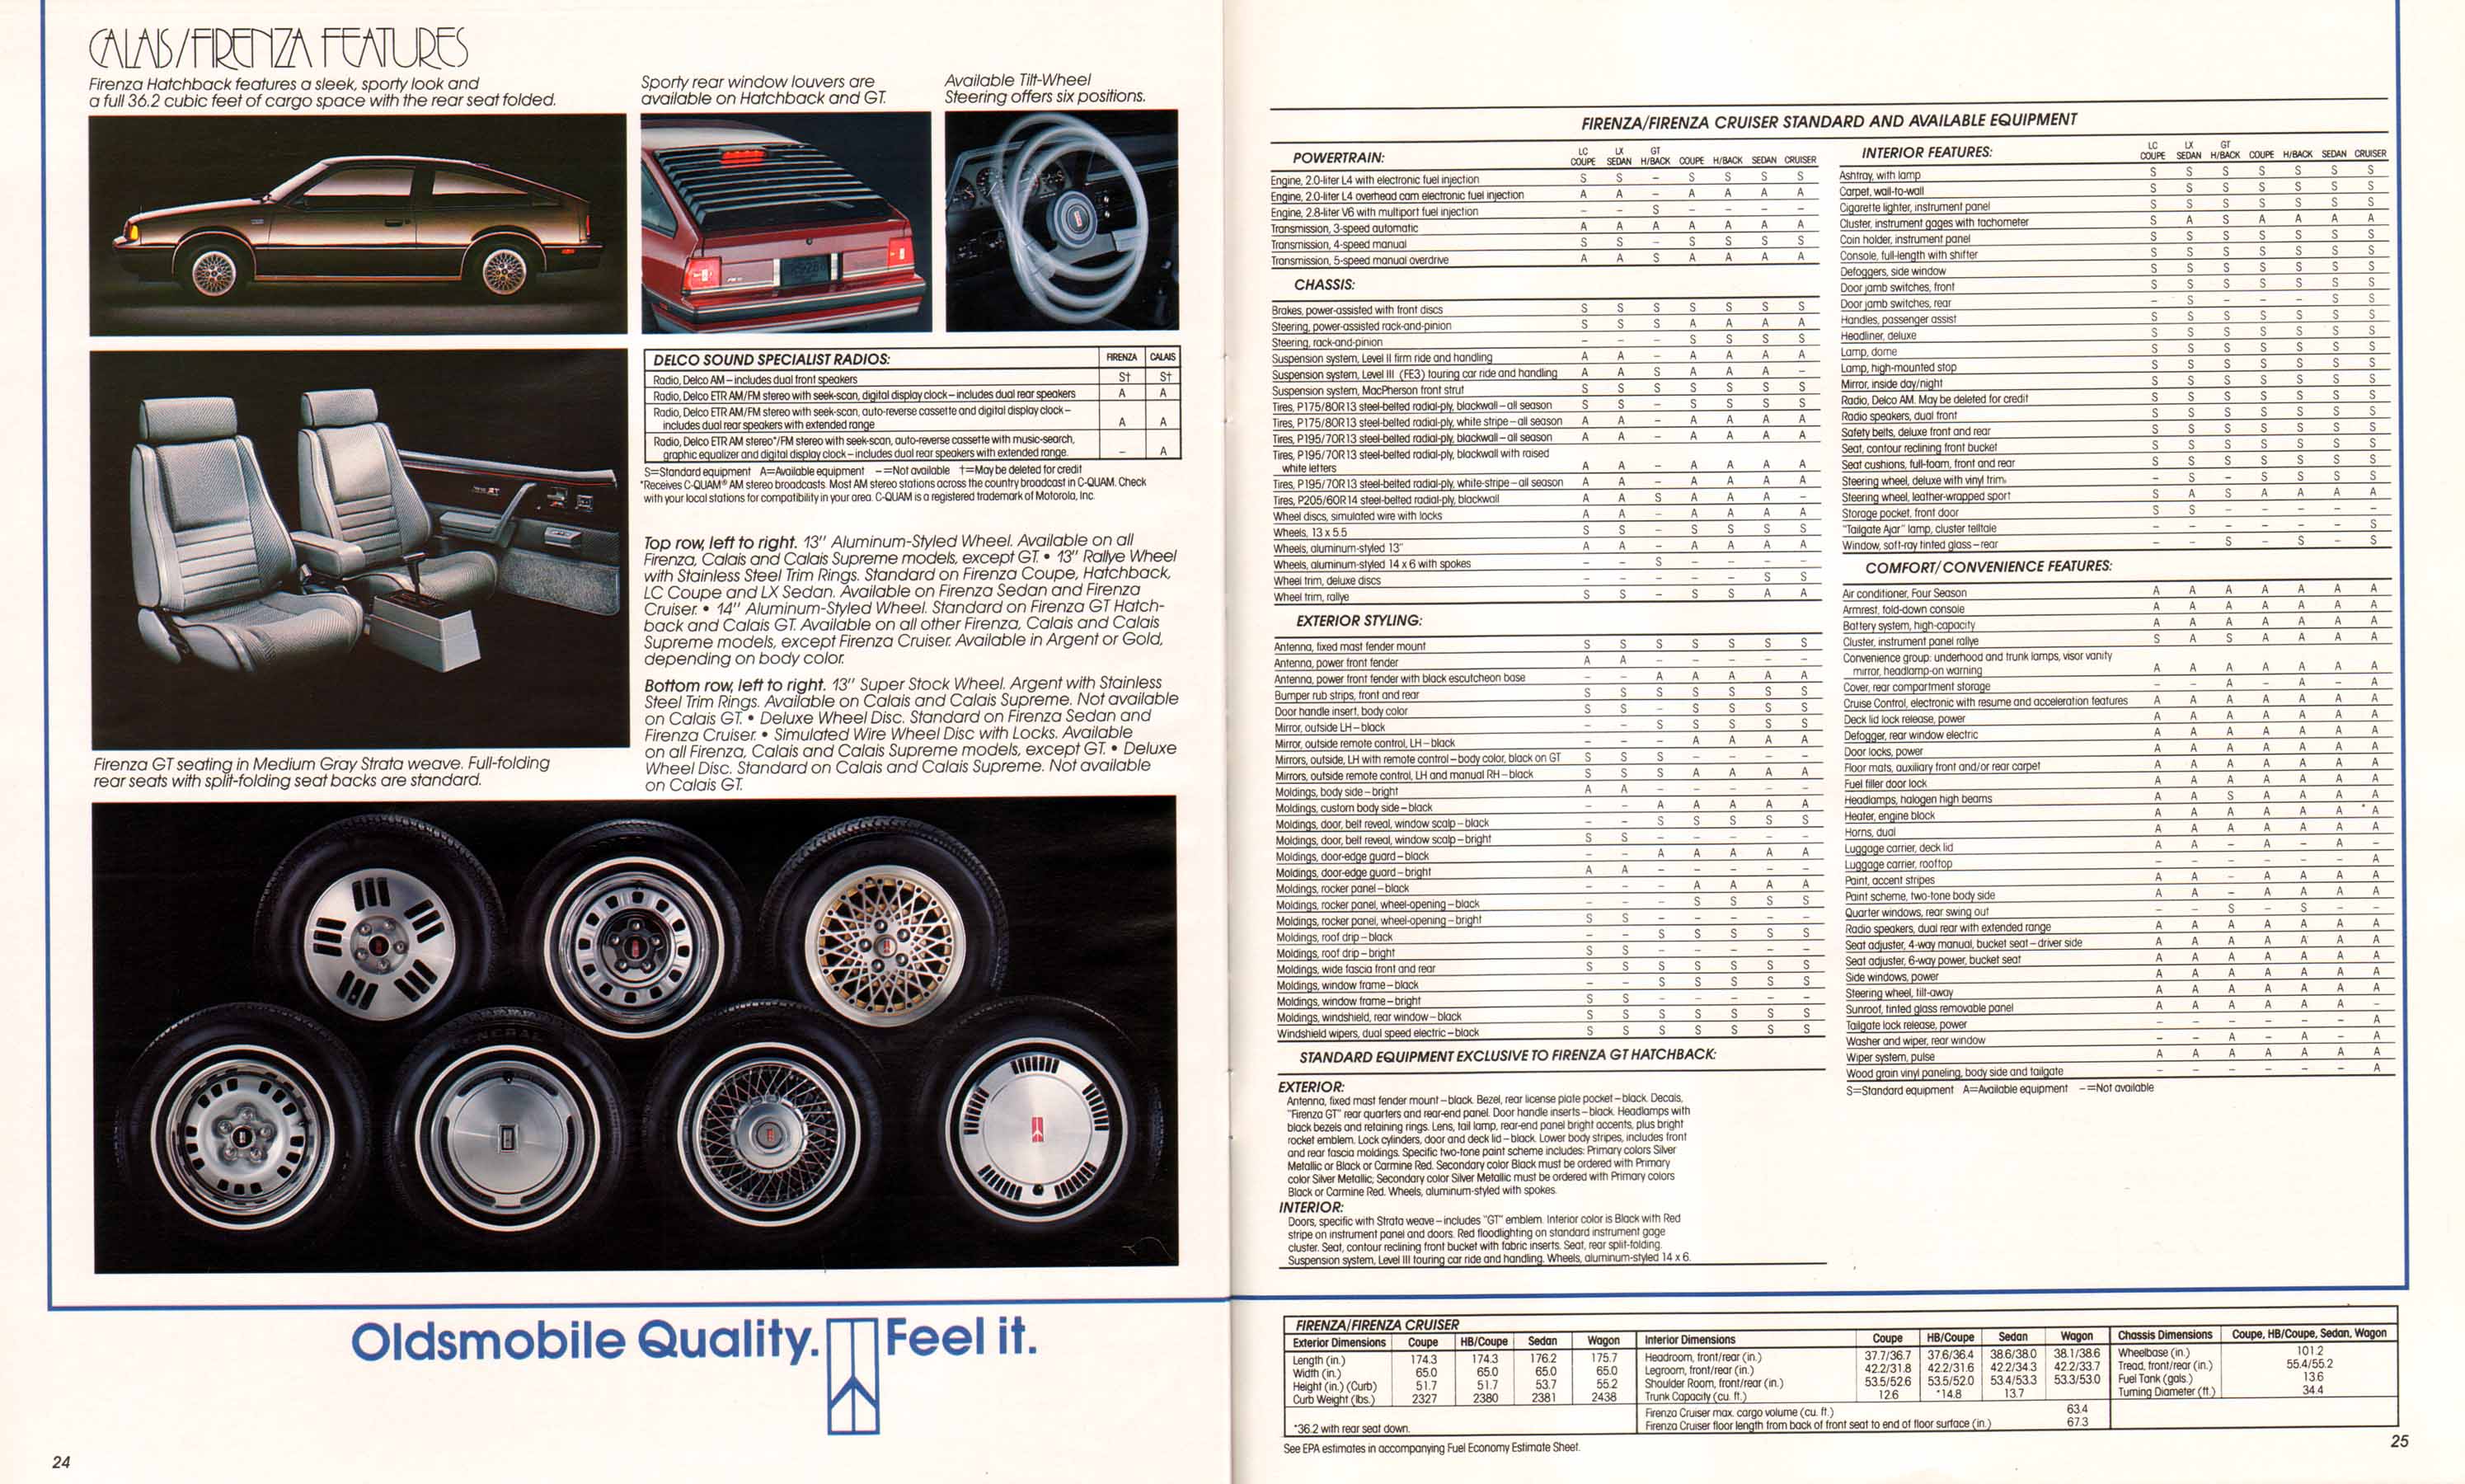 1987_Oldsmobile_Small_Size-24-25